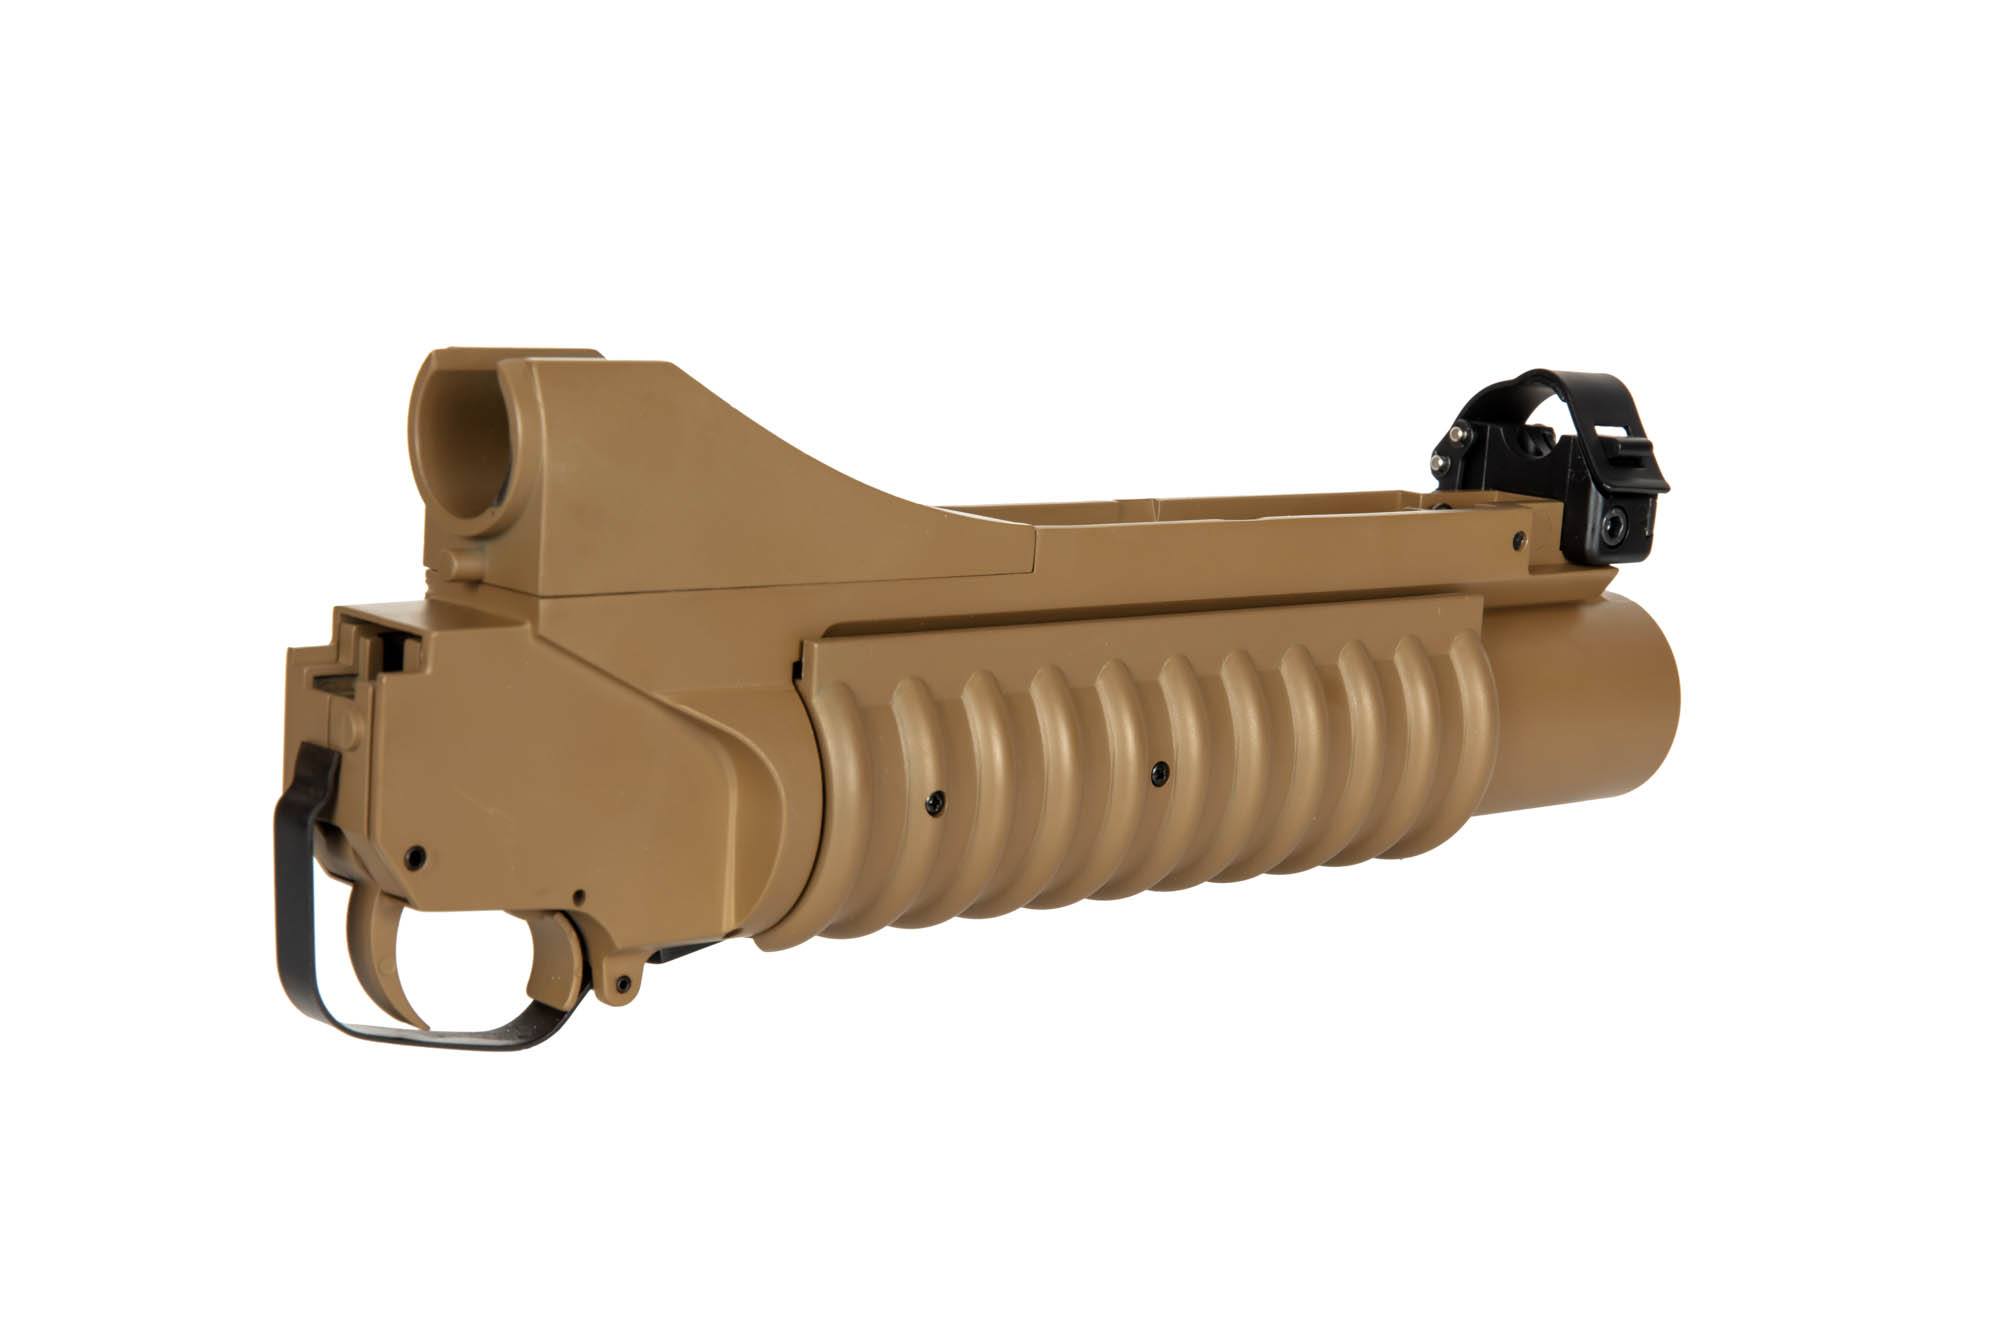 M203 Grenade Launcher - 3 in 1 - Short version - TAN by DBOY on Airsoft Mania Europe